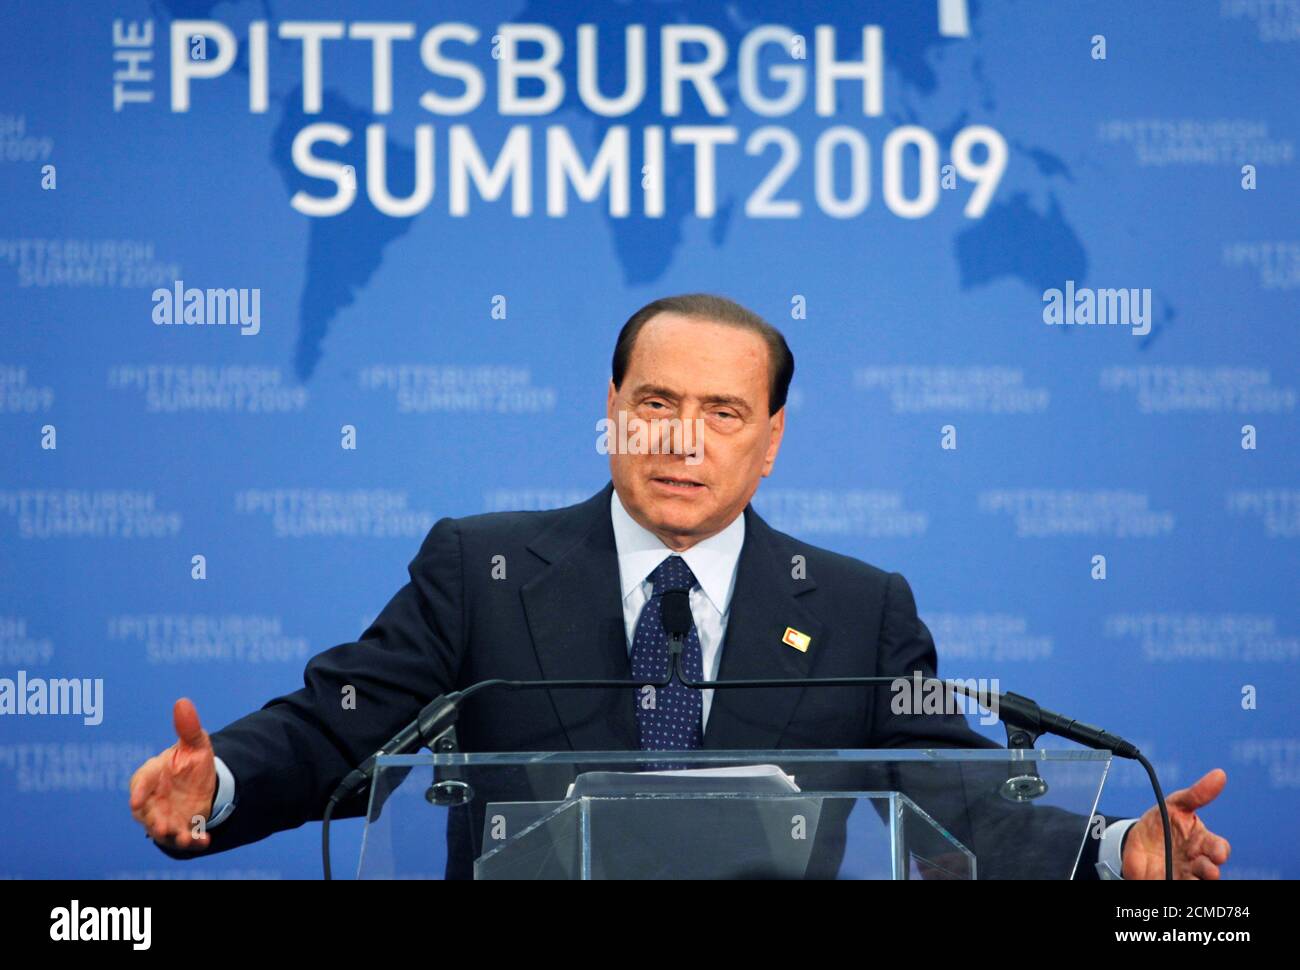 Italy's Prime Minister Silvio Berlusconi speaks about the results of the G20 Summit at a post summit news conference after the conclusion of the summit in the Pittsburgh Convention Center in Pittsburgh, Pennsylvania, September 25, 2009. REUTERS/Jim Bourg (UNITED STATES POLITICS BUSINESS) Stock Photo